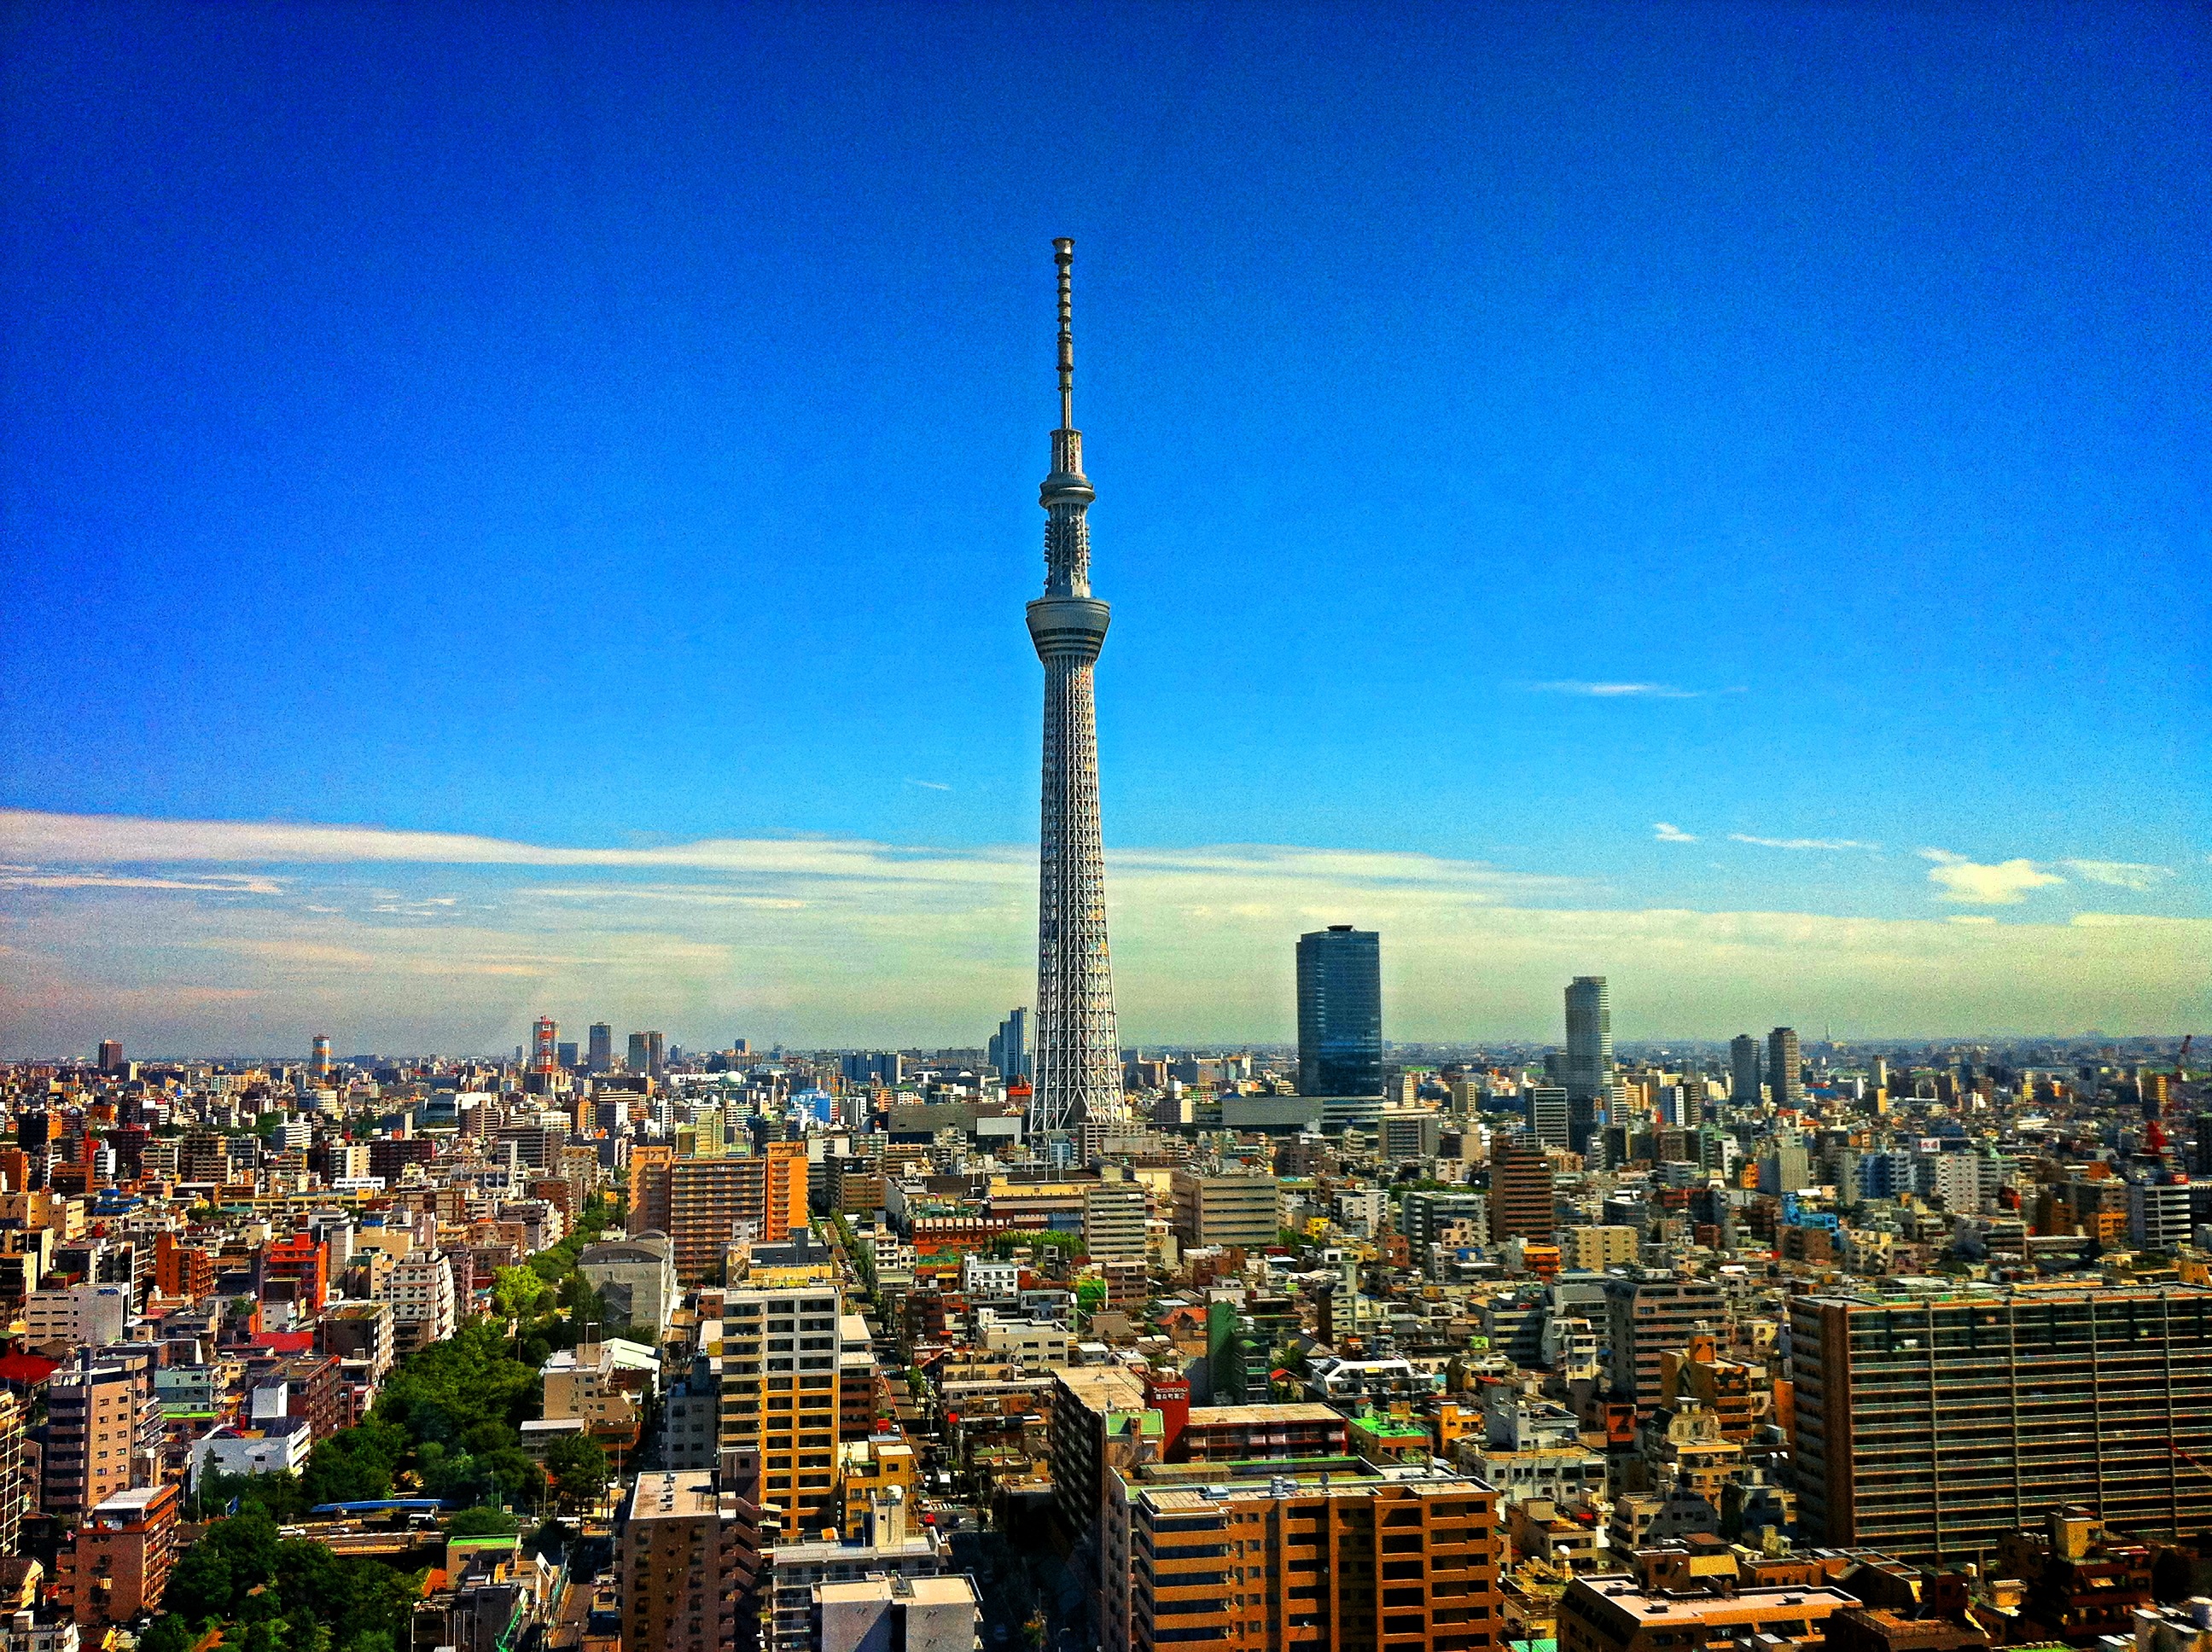 Cityview with skyree in the middle in Tokyo, Japan image - Free stock photo - Public Domain 